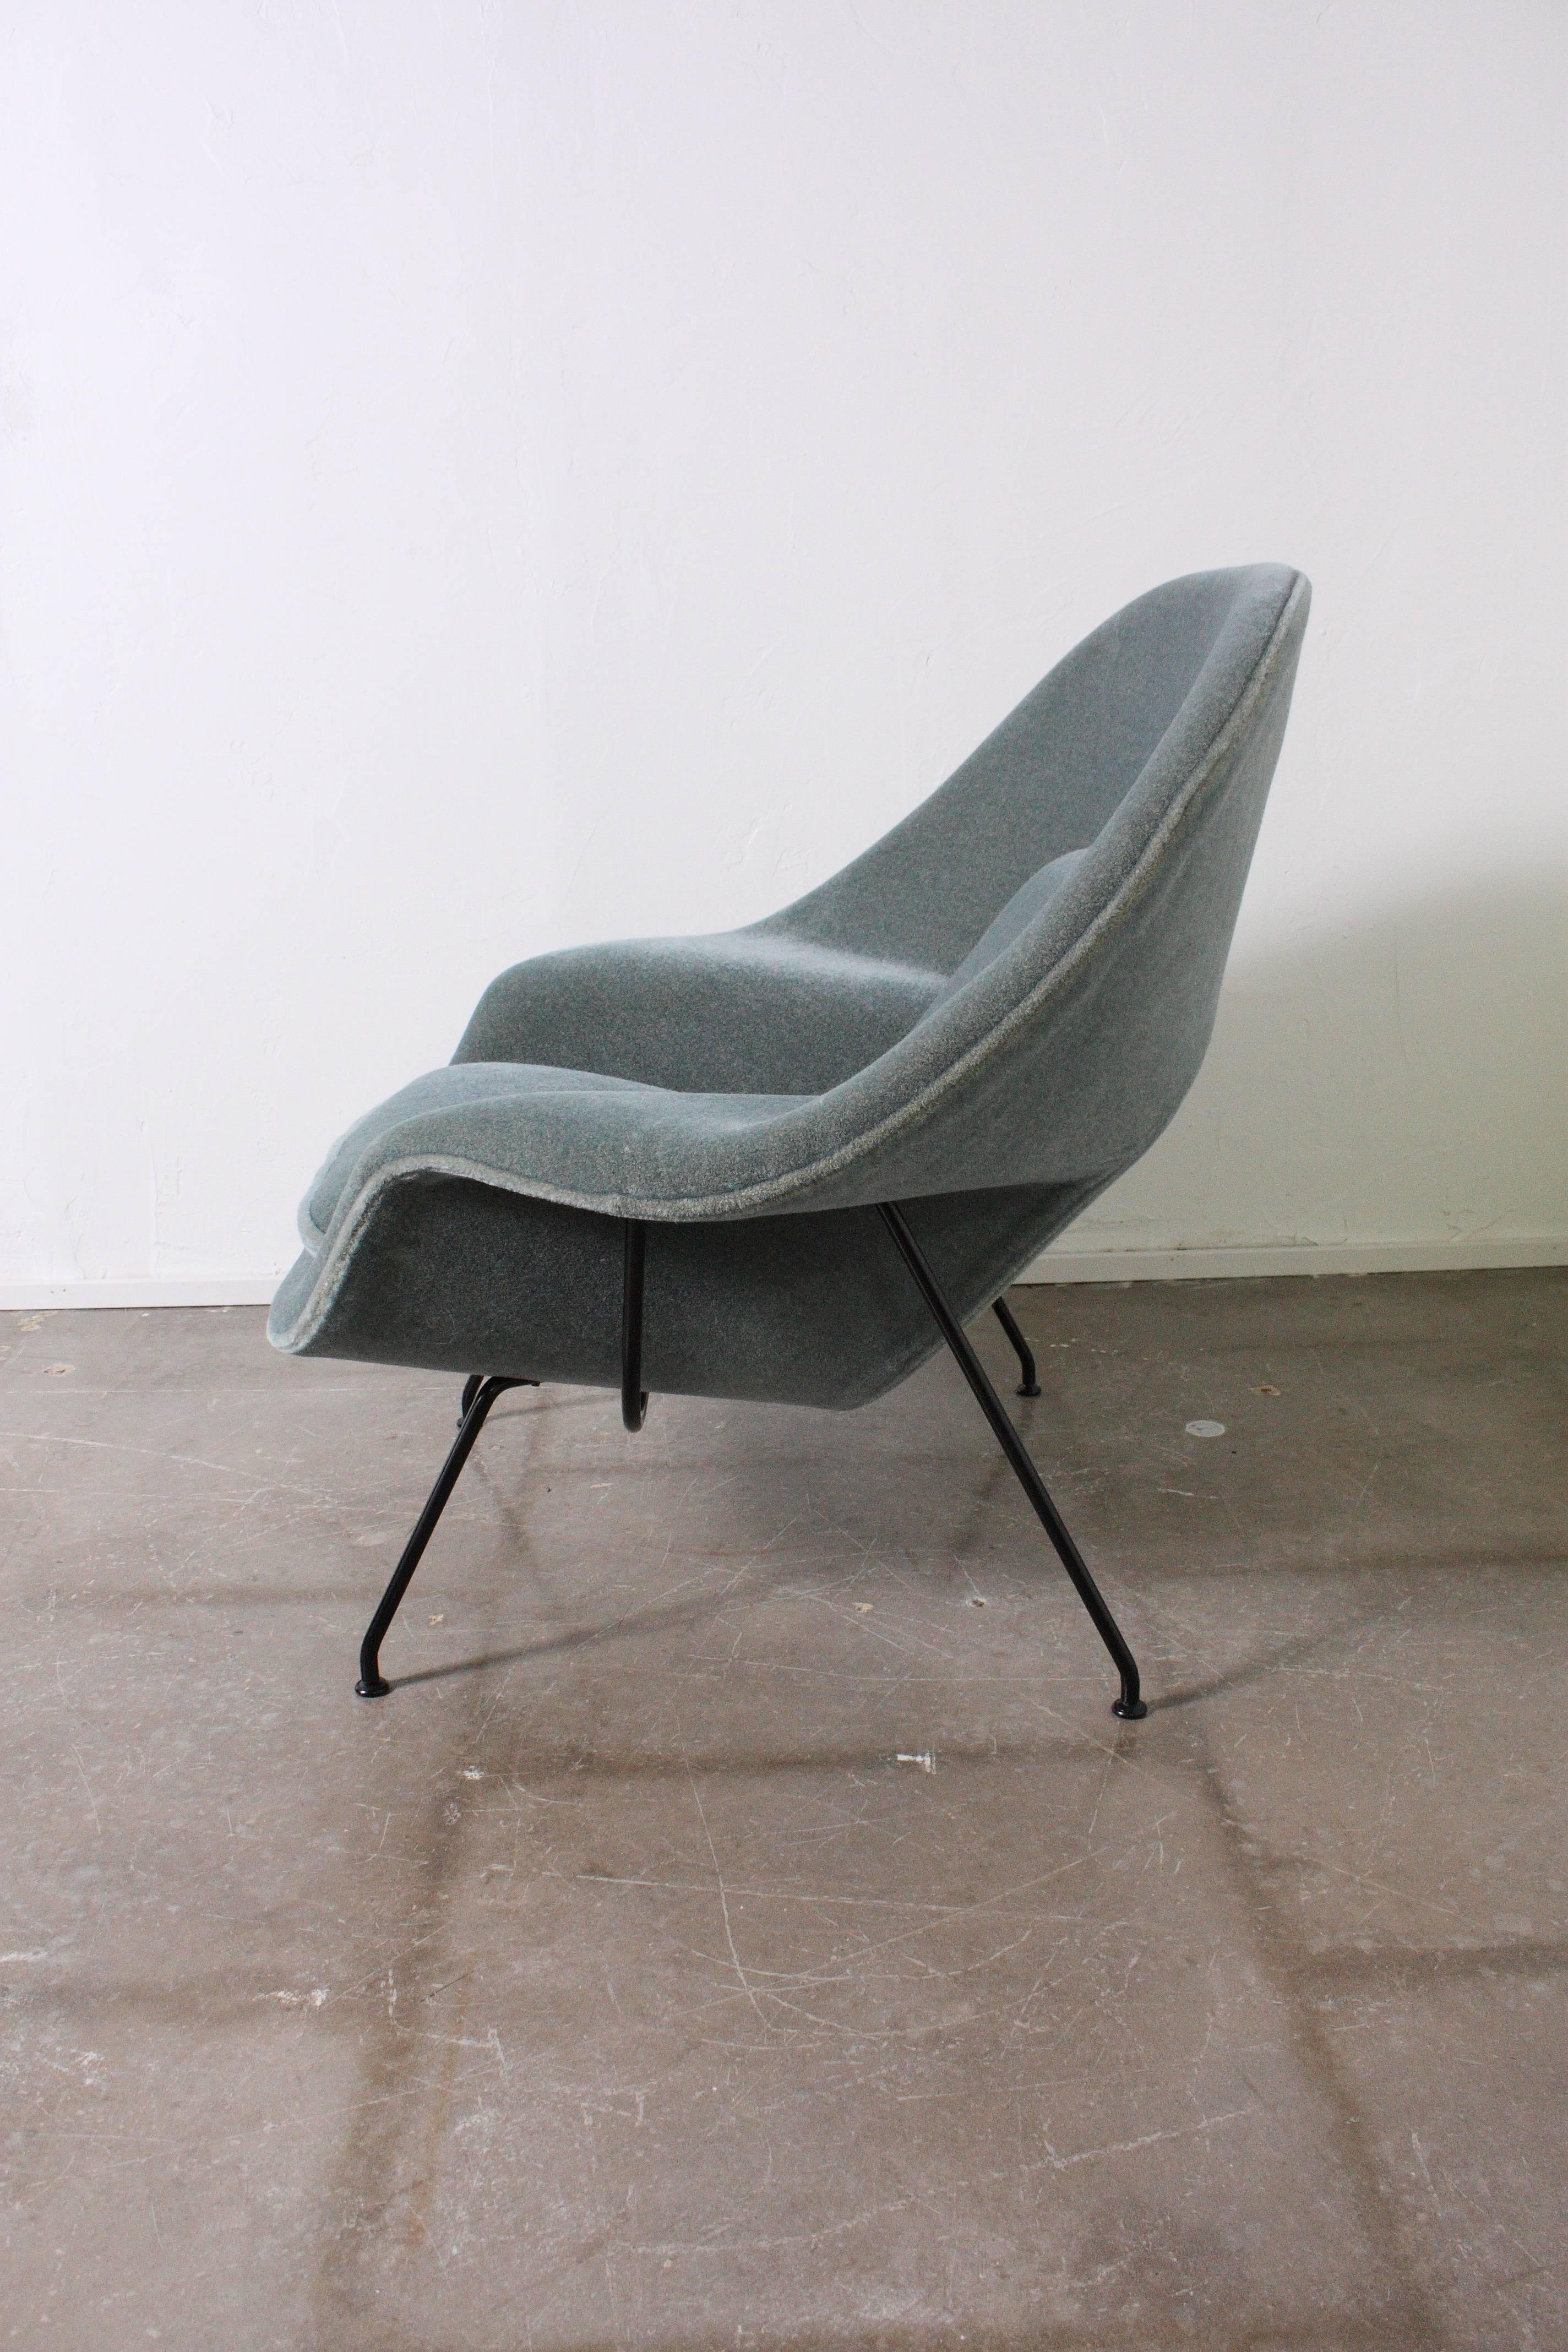 Wonderful iconic design by Eero Saarinen for Knoll. This Womb chair was custom ordered in Knoll Luxe mohair prima mist/beige with black base. The chair is flawless. The price listed is for a single chair. Be sure and check space 20th century modern